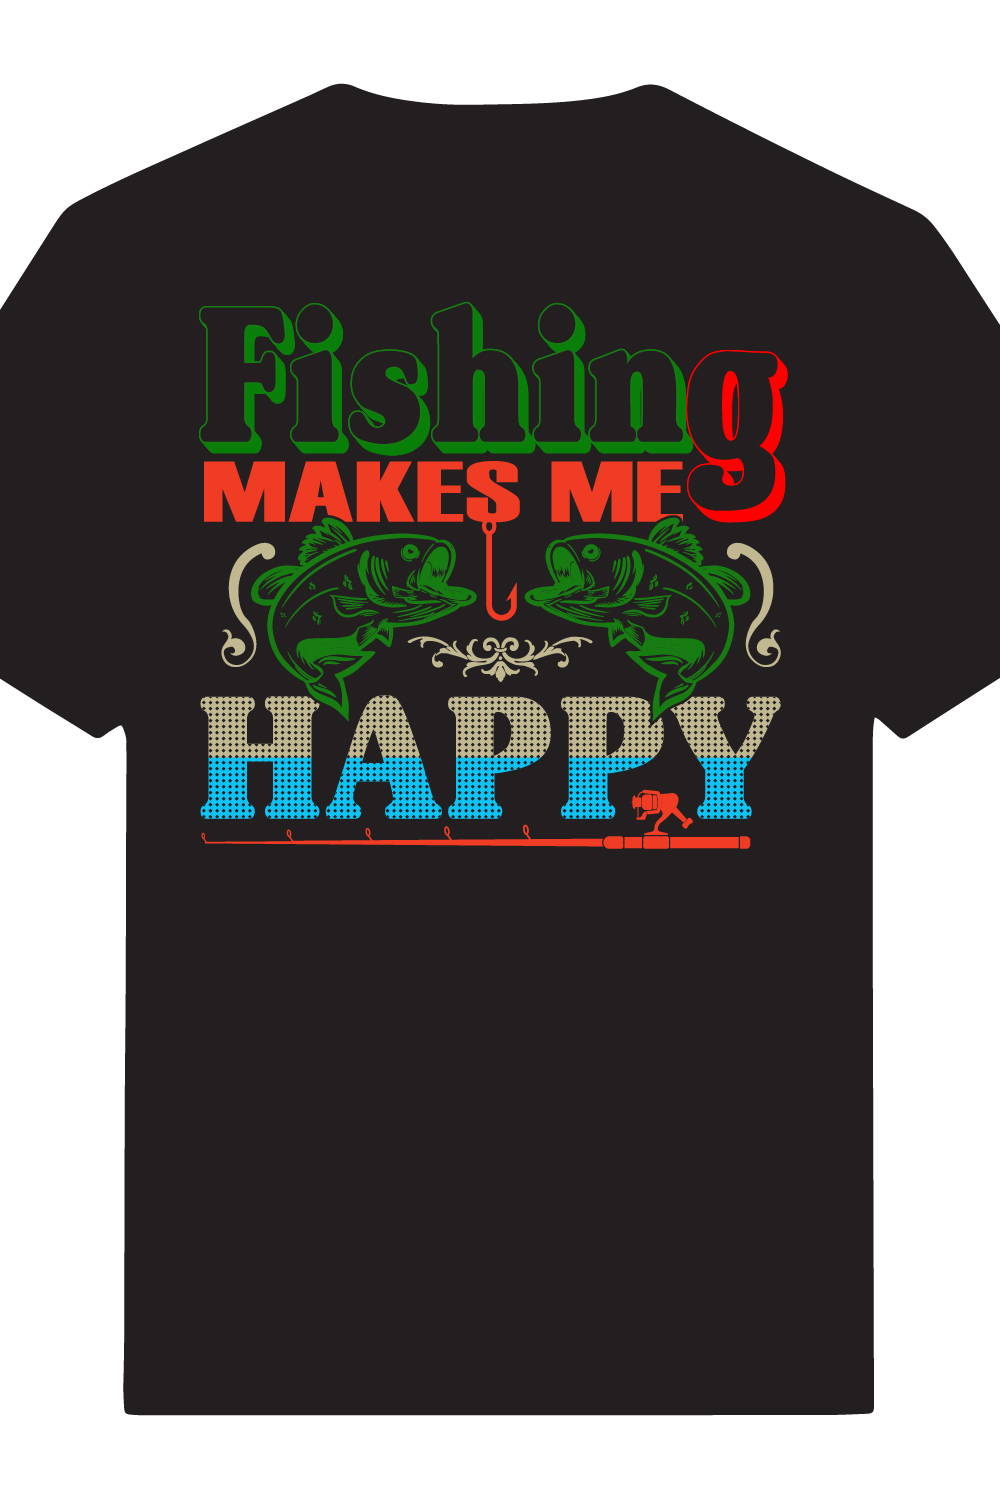 Fishing Makes me happy typography t-shirt design pinterest preview image.